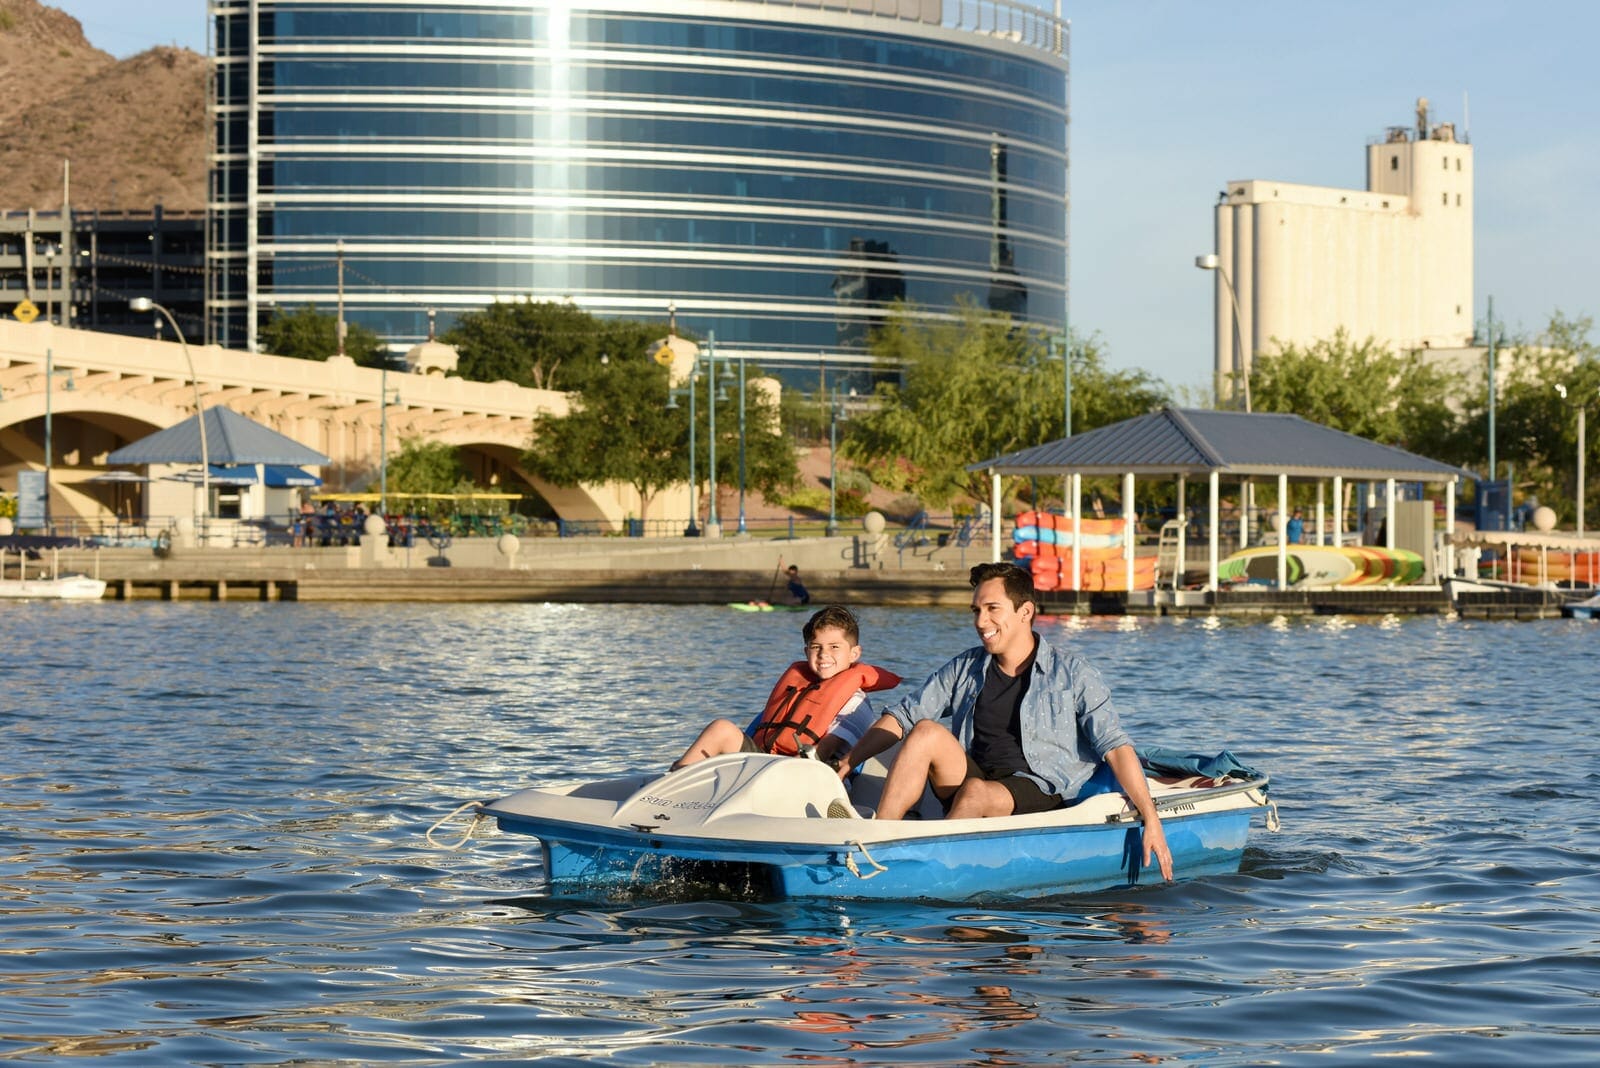 Tempe Town Lake and Beach Park pedal boat